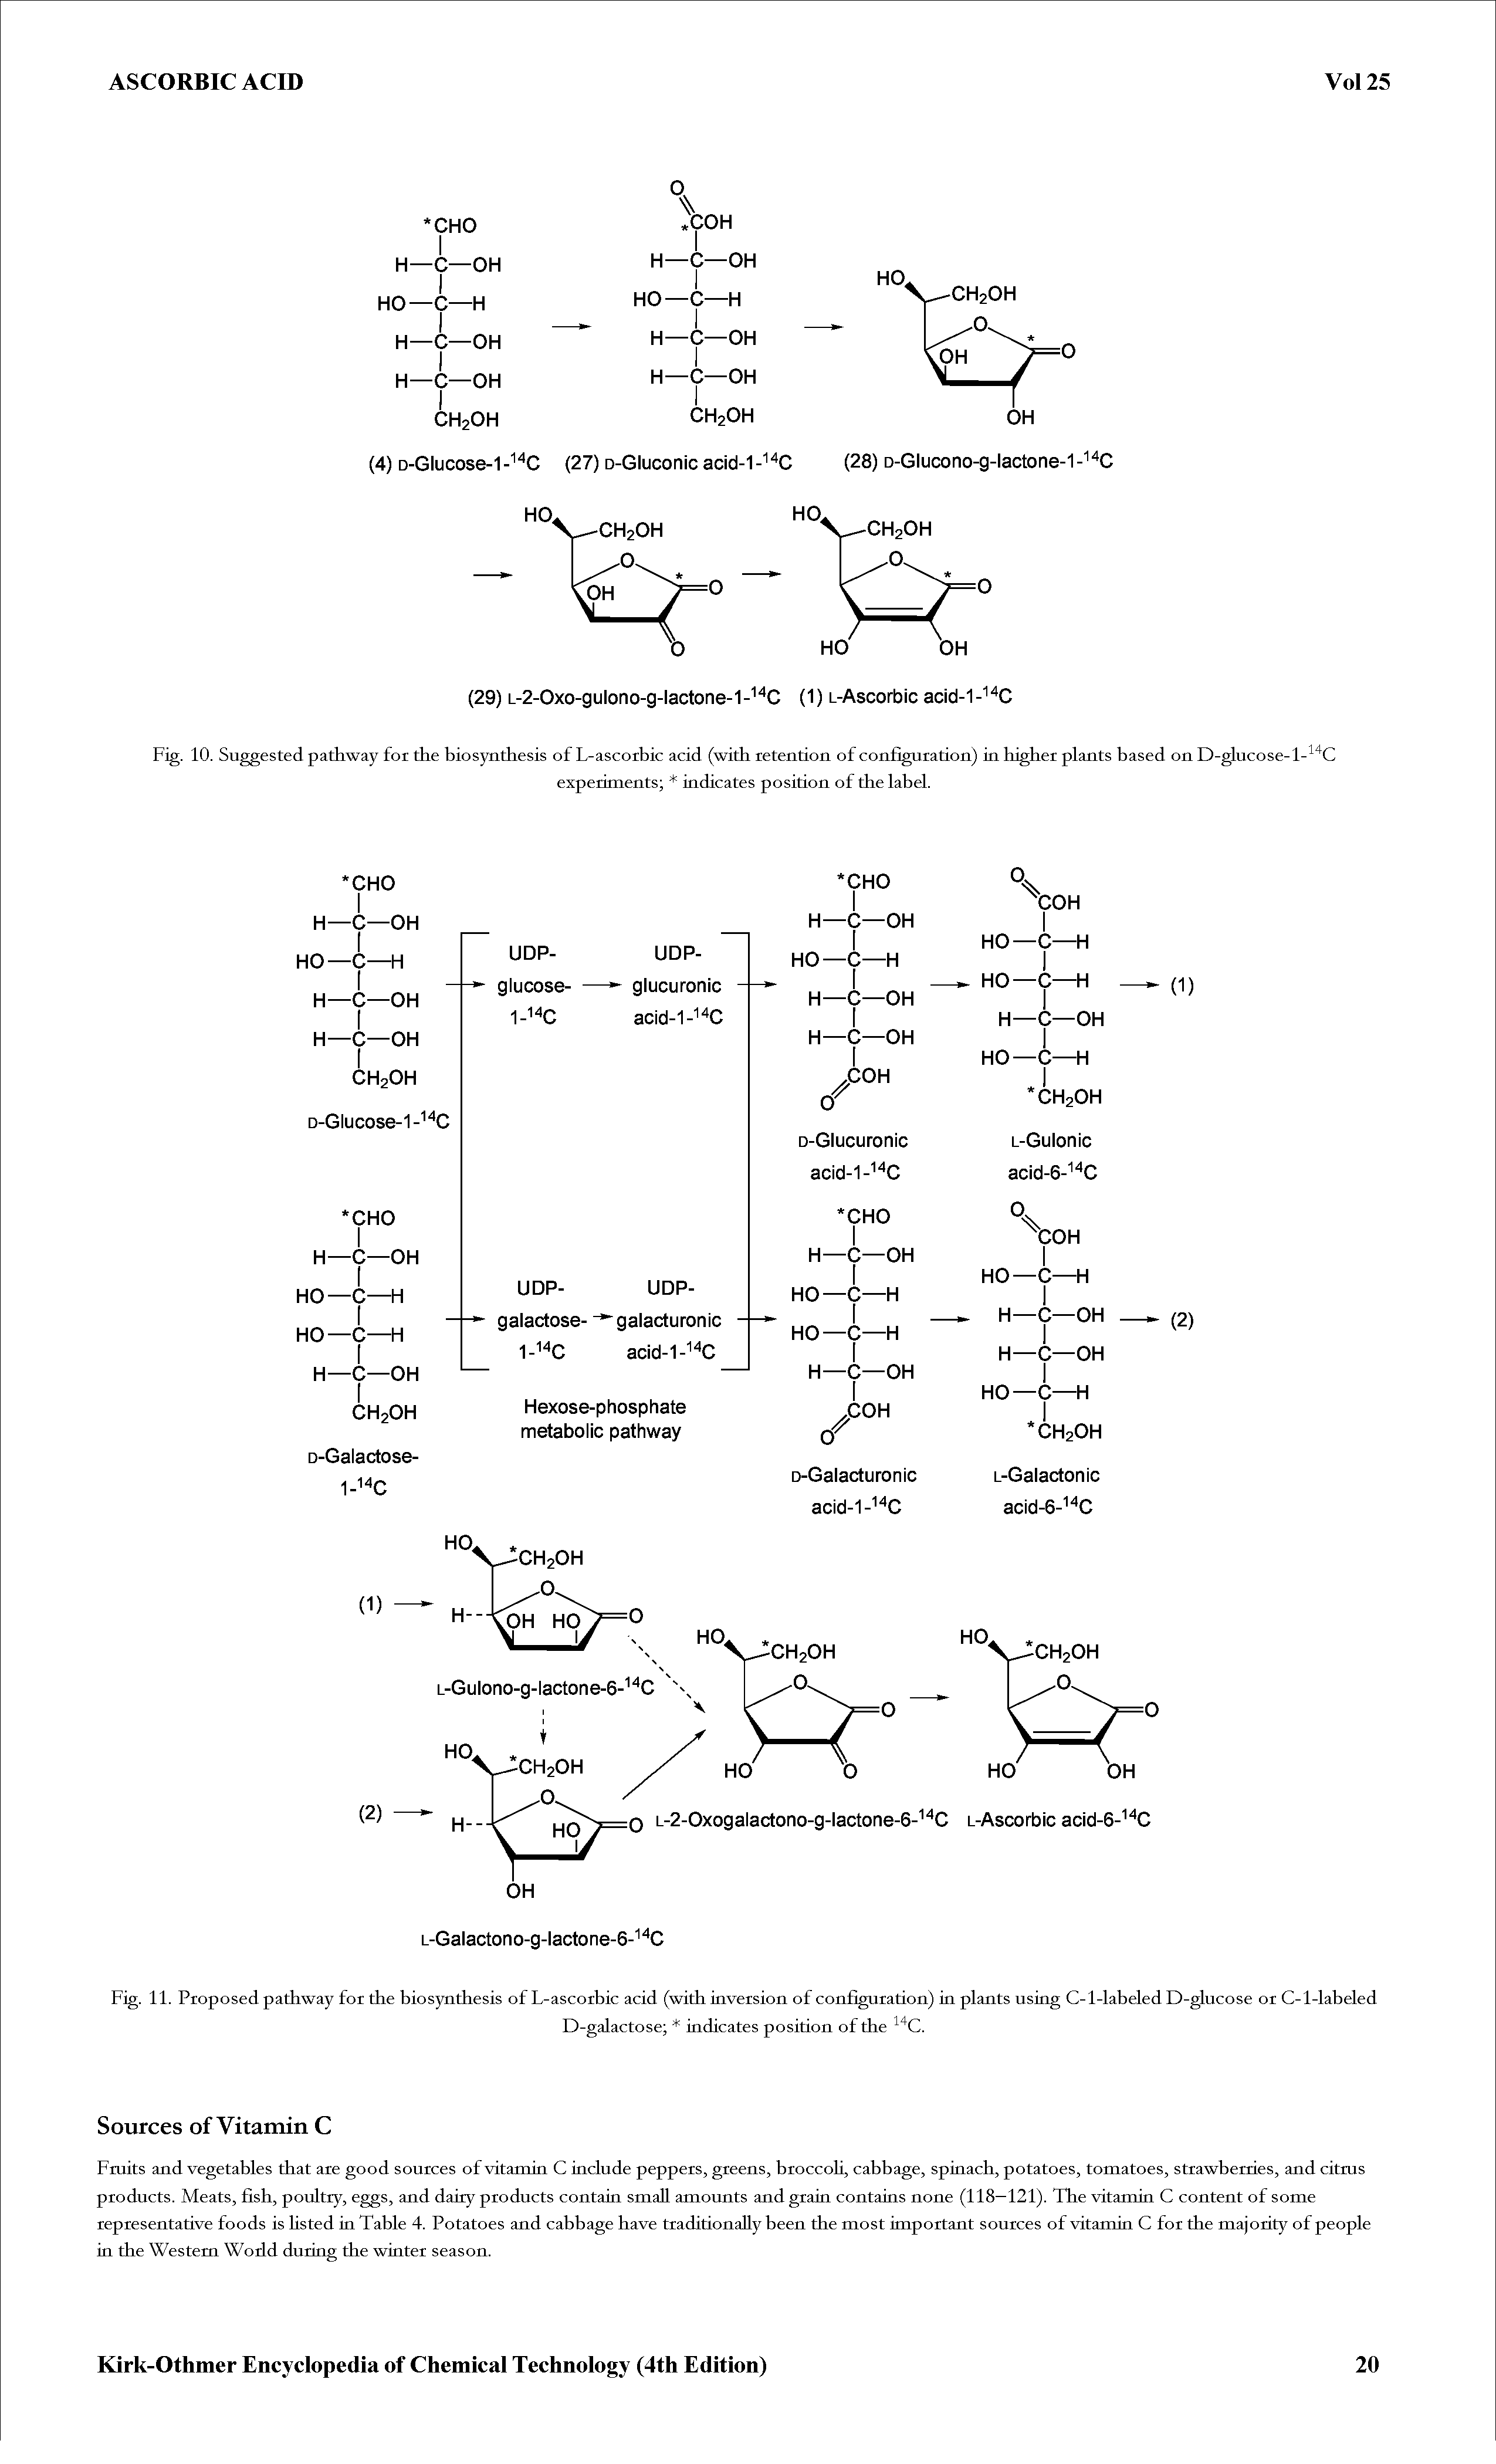 Fig. 11. Proposed pathway for the biosynthesis of L-ascorbic acid (with inversion of configuration) in plants using C-l-labeled D-glucose or C-l-labeled...